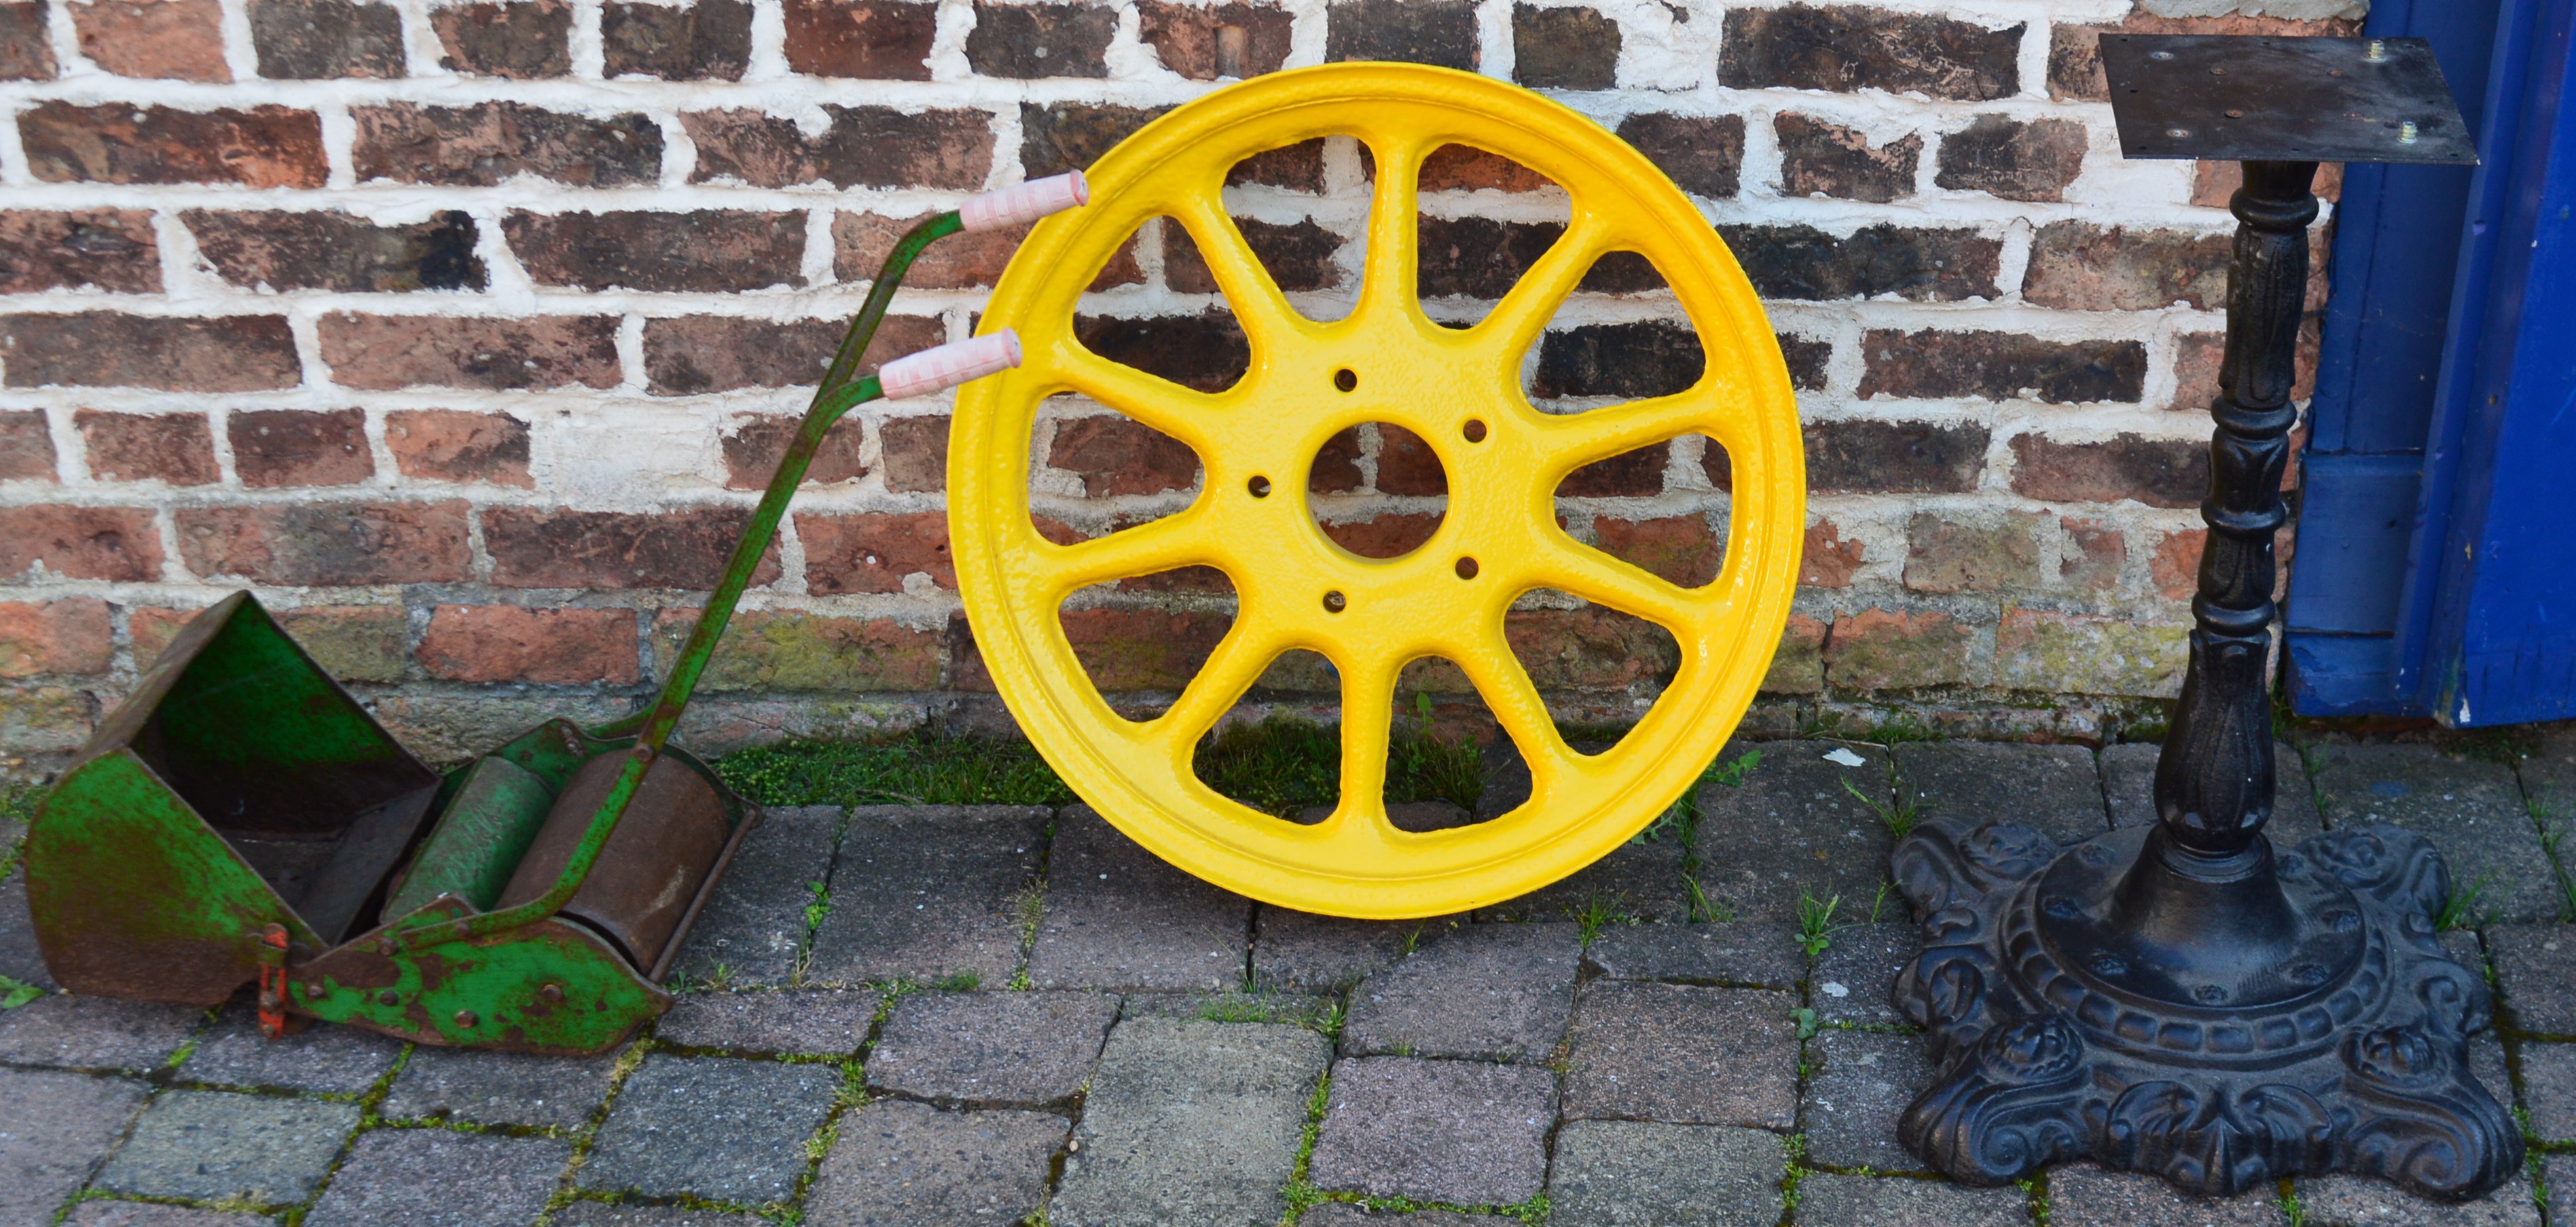 Tractor wheel, cast iron table base and child's Webb hand push lawn mower